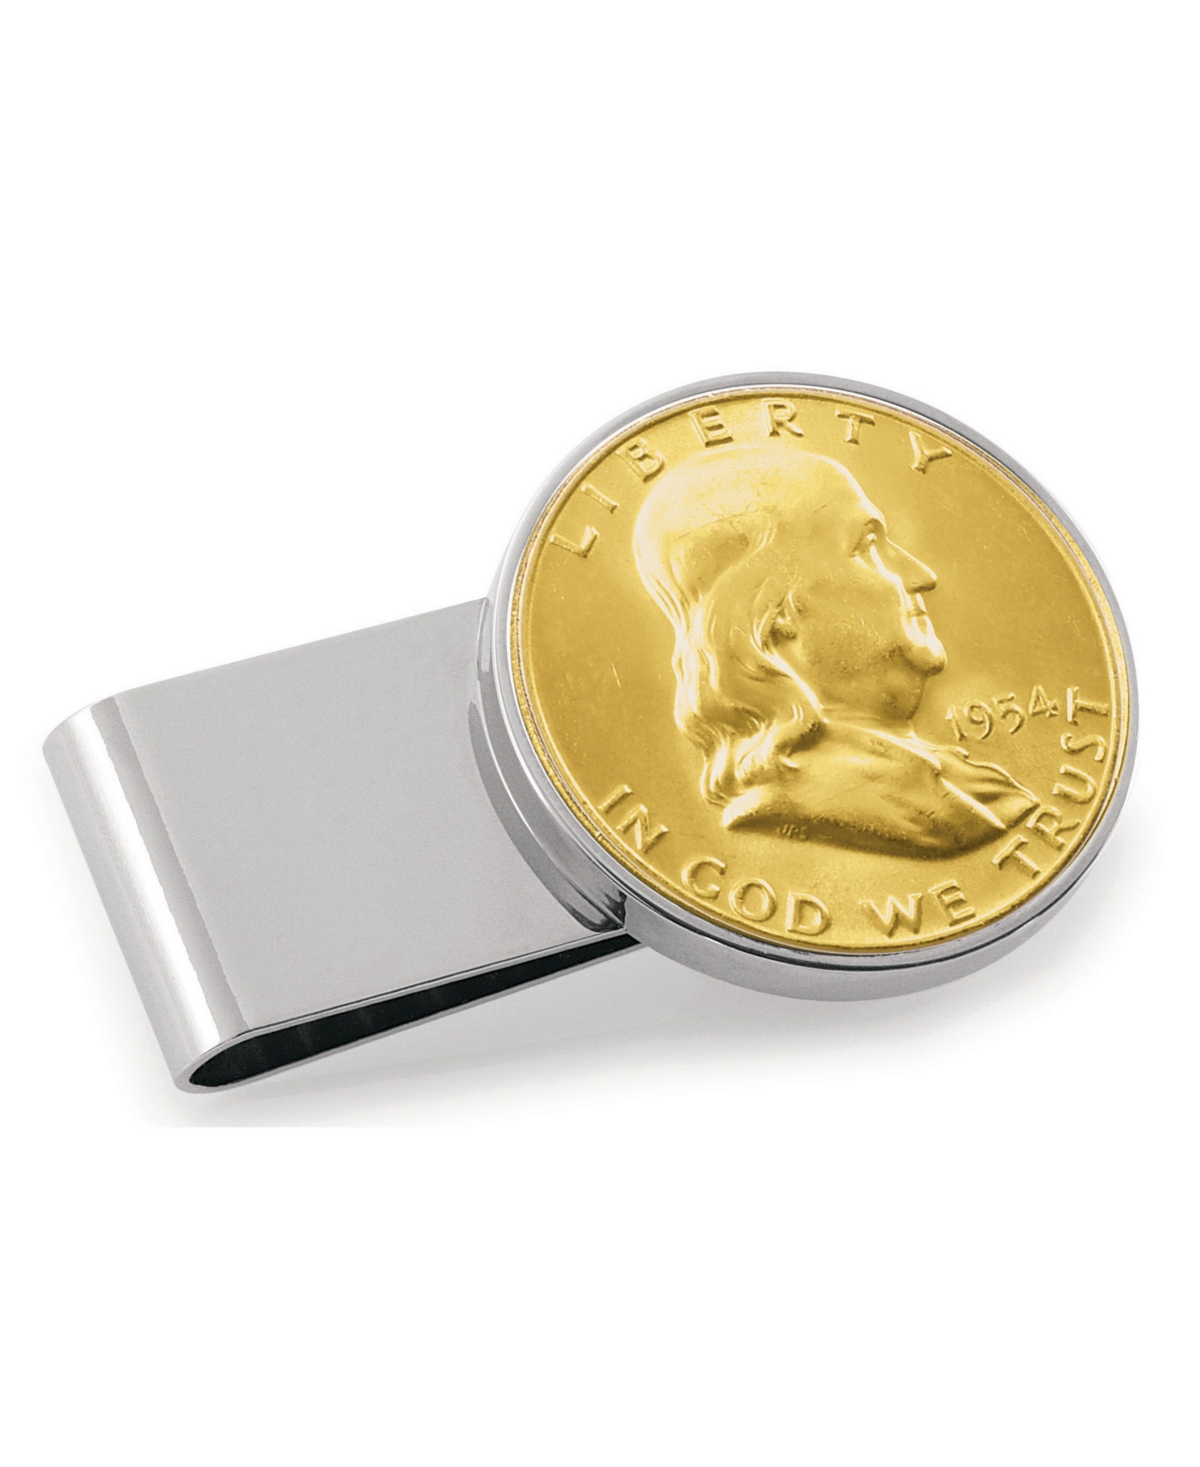 Men's American Coin Treasures Gold-Layered Silver Franklin Half Dollar Stainless Steel Coin Money Clip - Silver